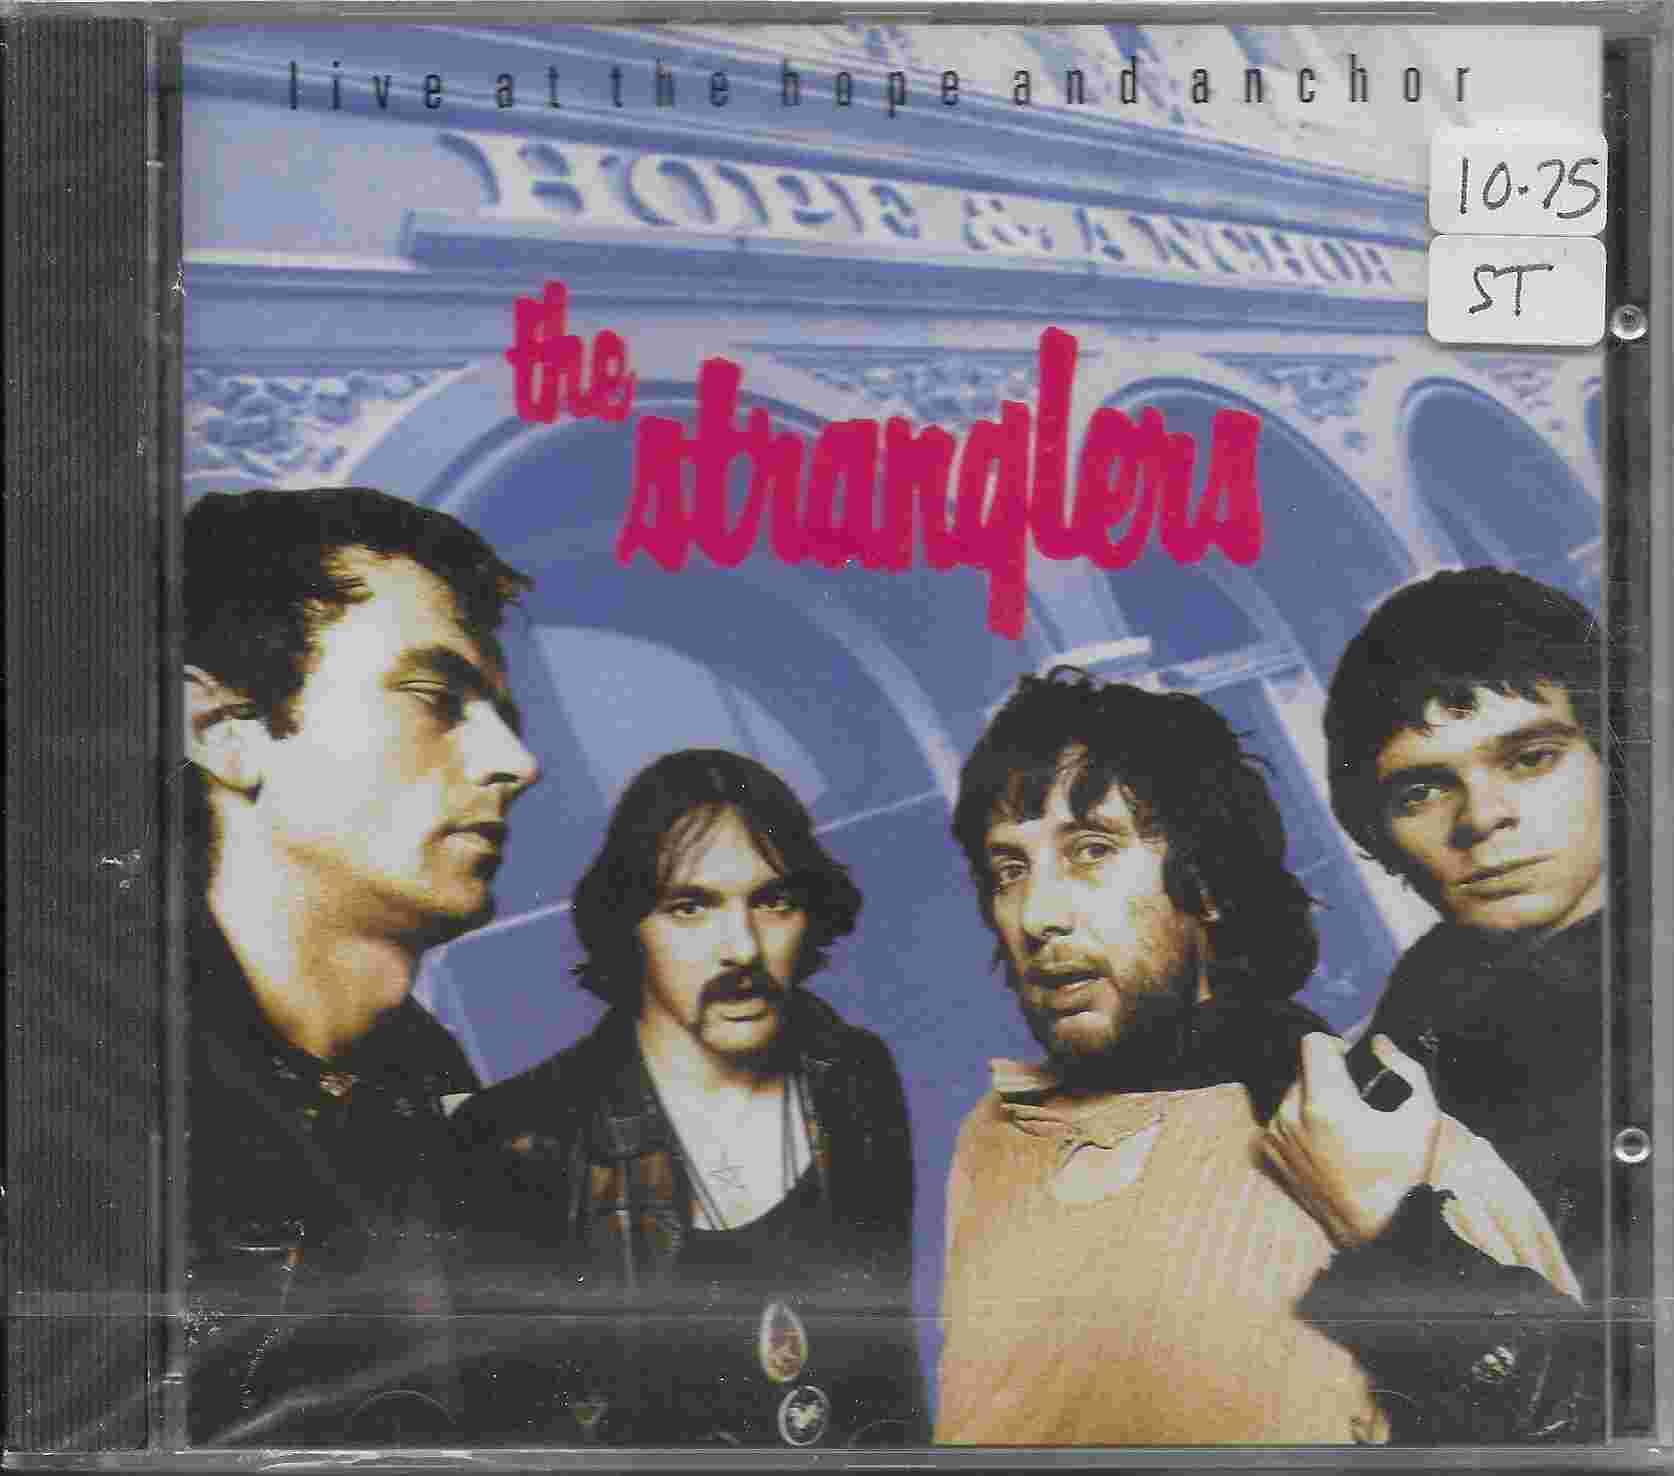 Picture of CDP 798789 2 Live at the Hope and Anchor by artist The Stranglers